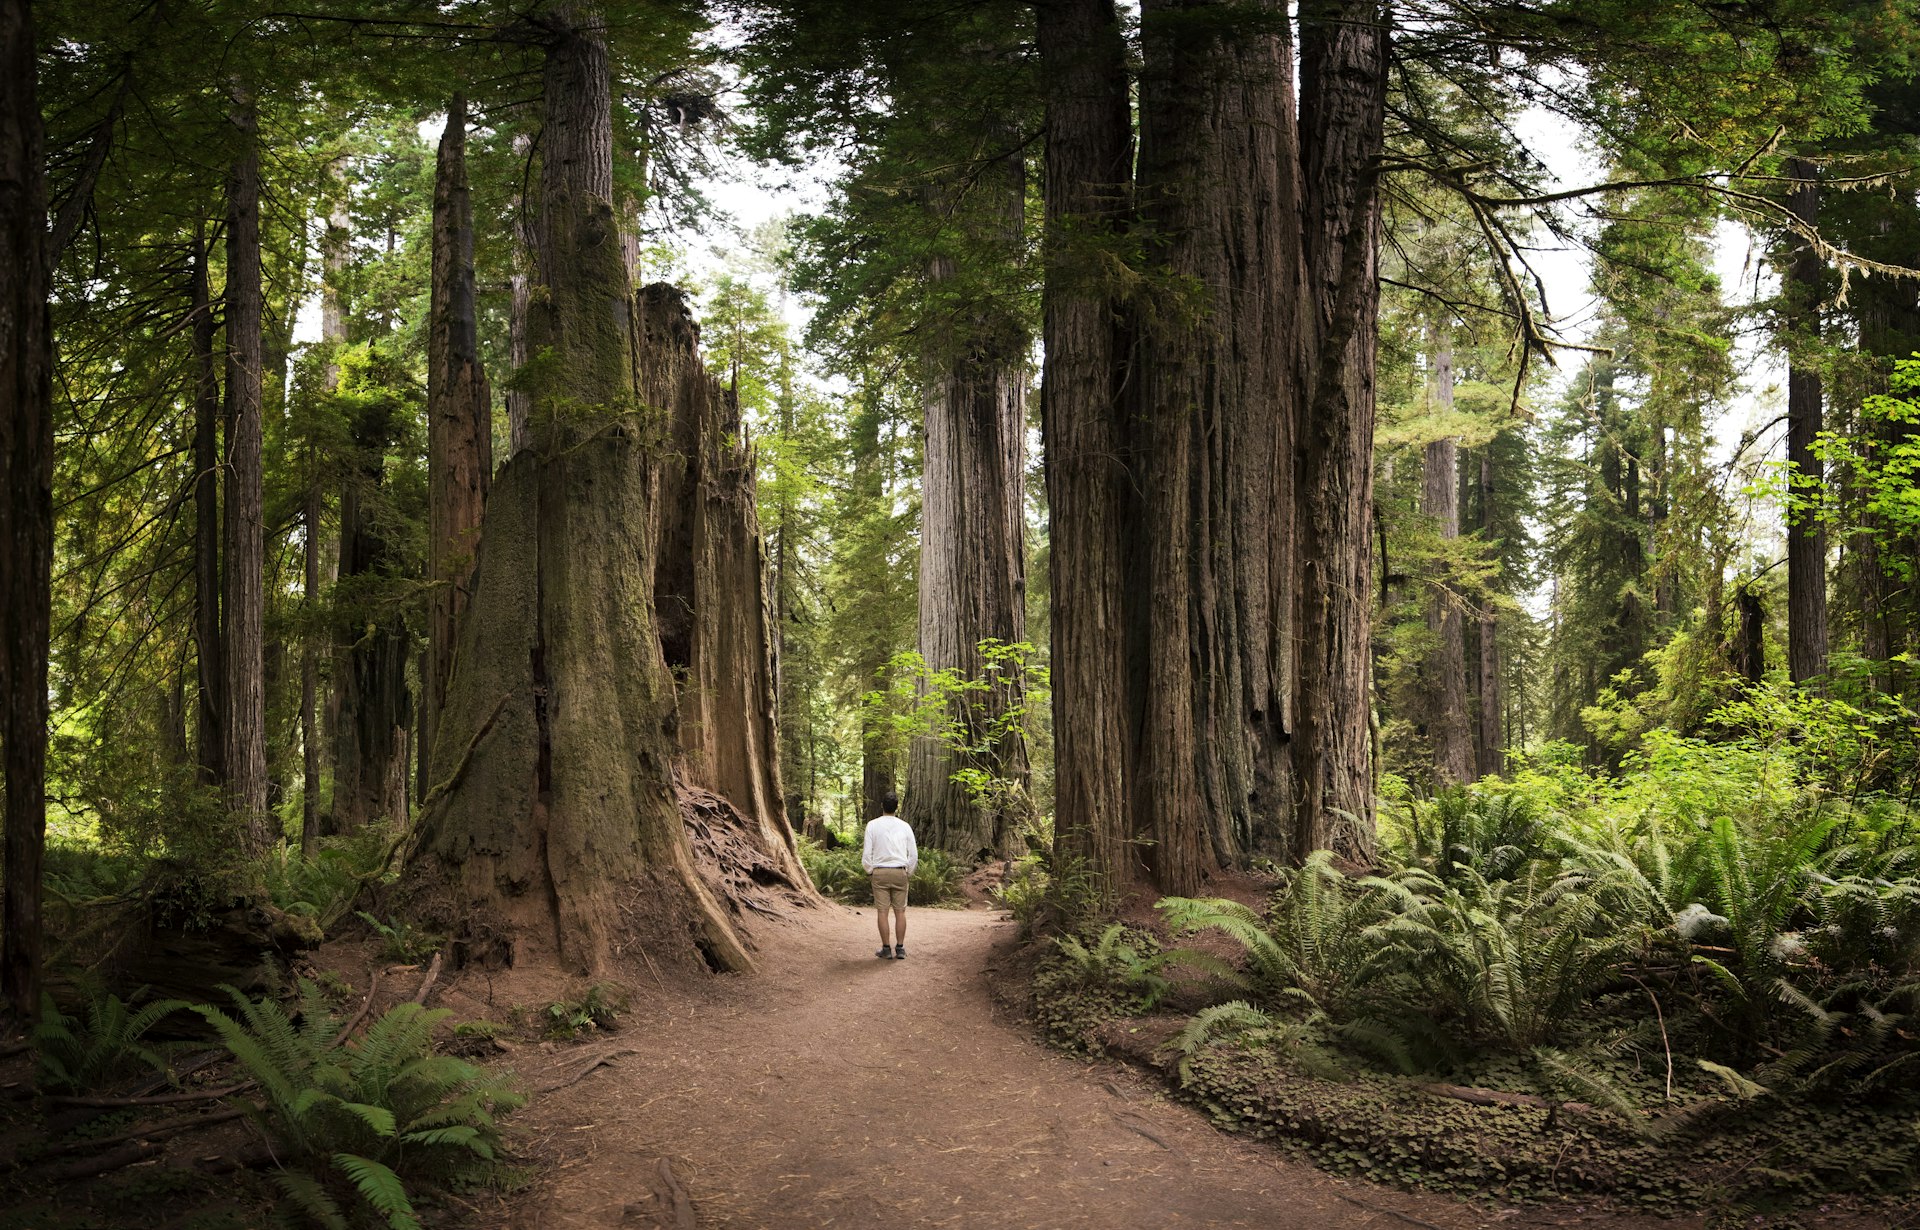 A man walks on a path by giant trees in Redwood National Park, California, USA